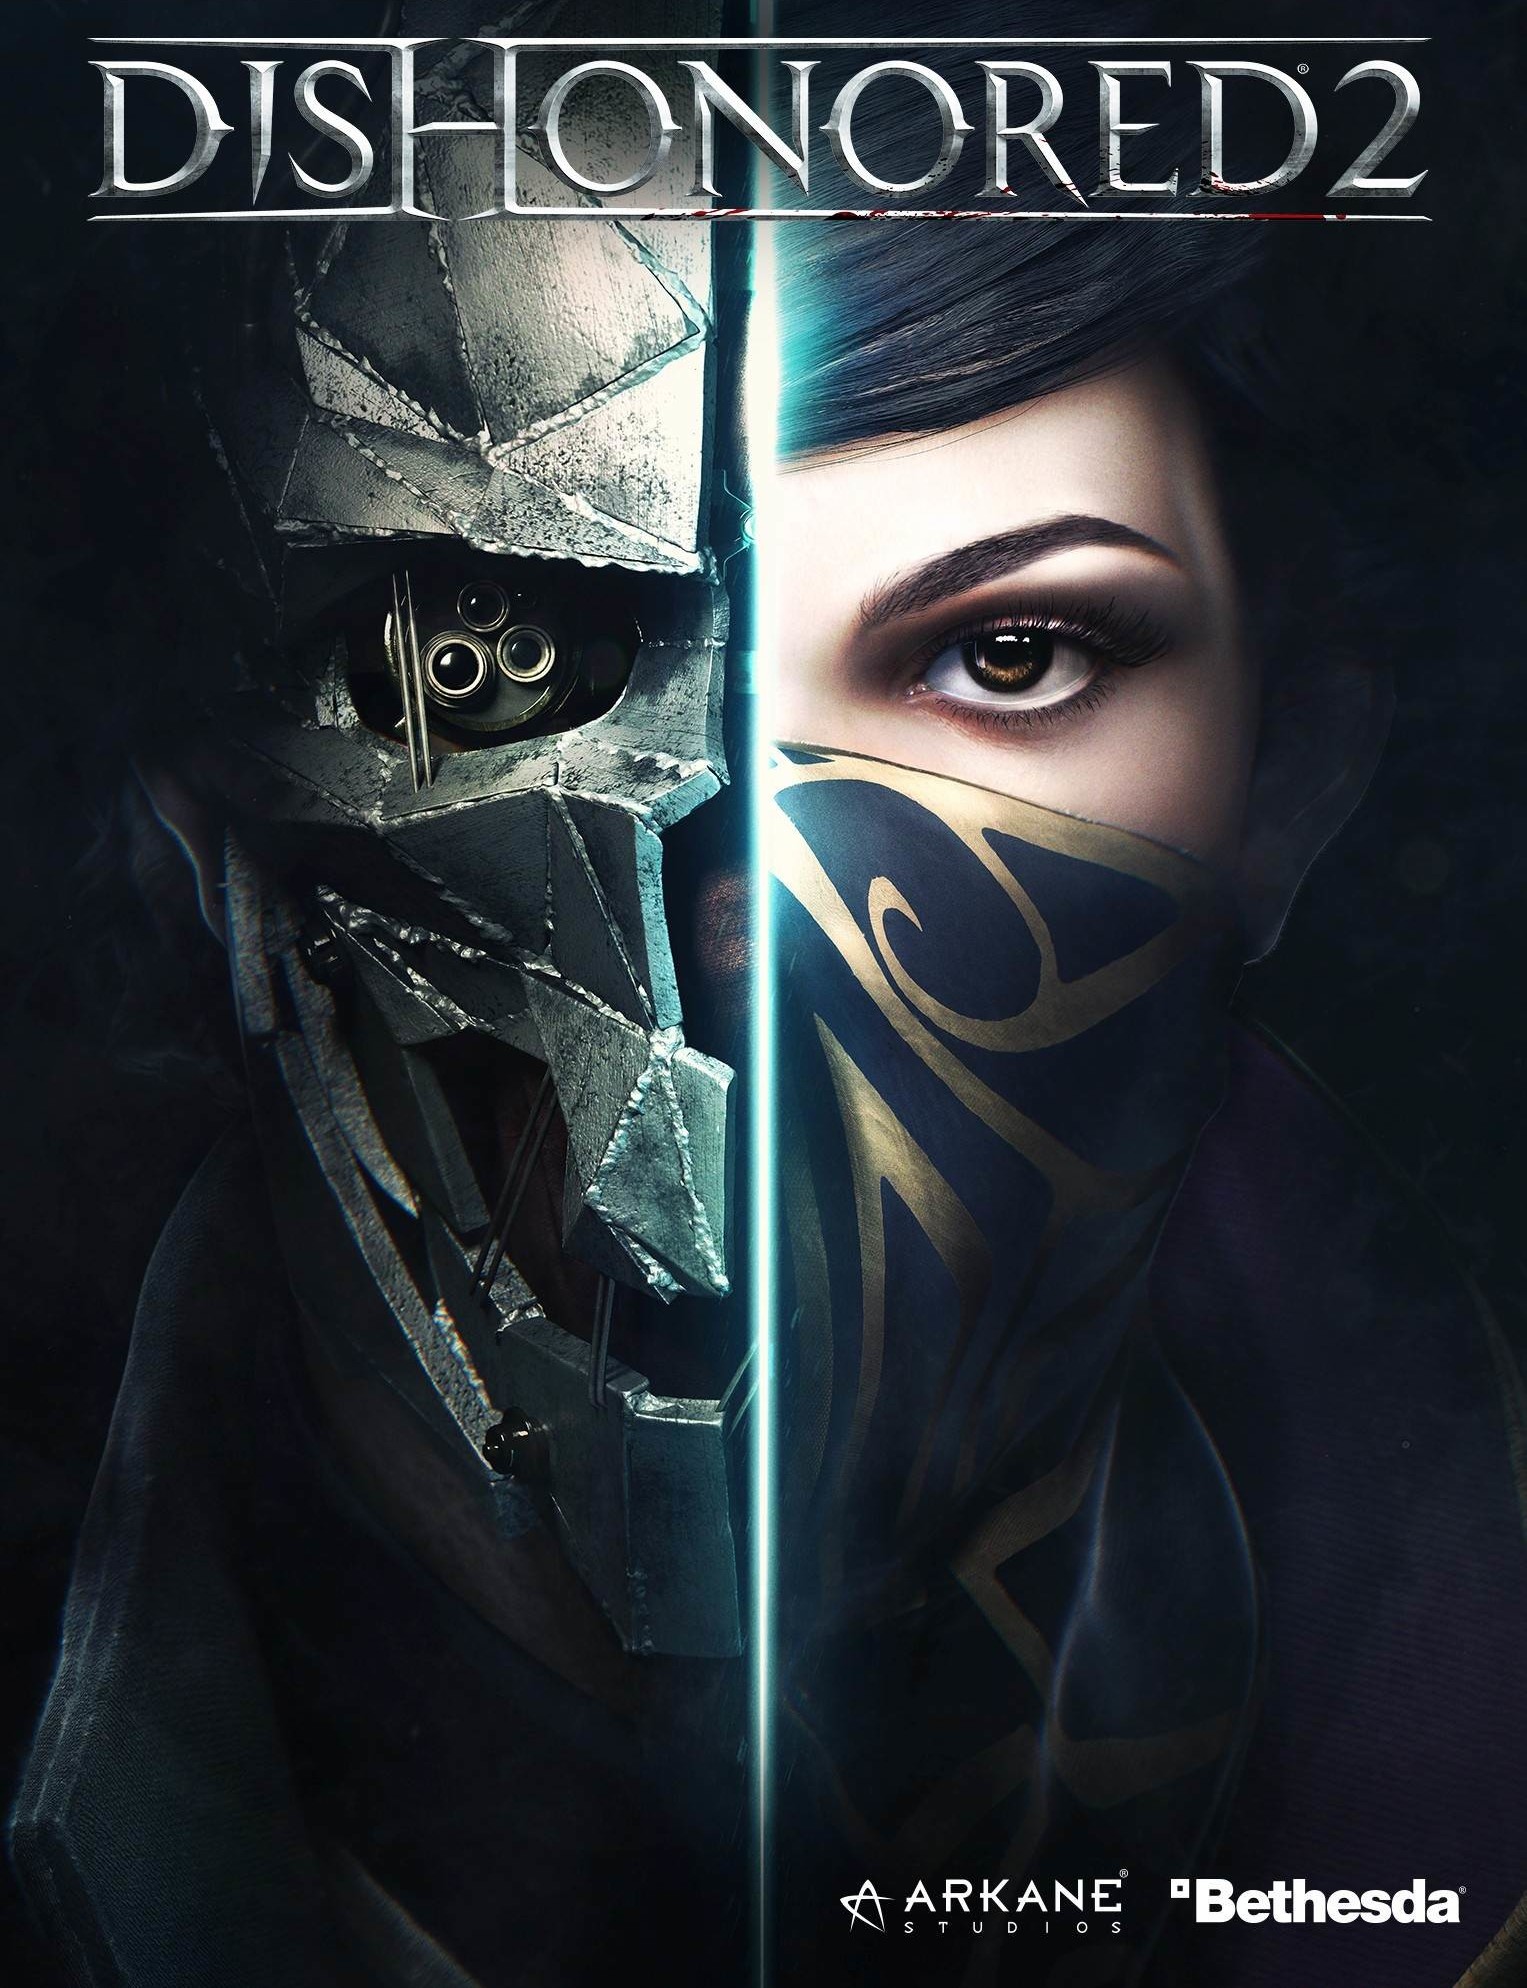 Dishonored 2 To Release November 11, 2016